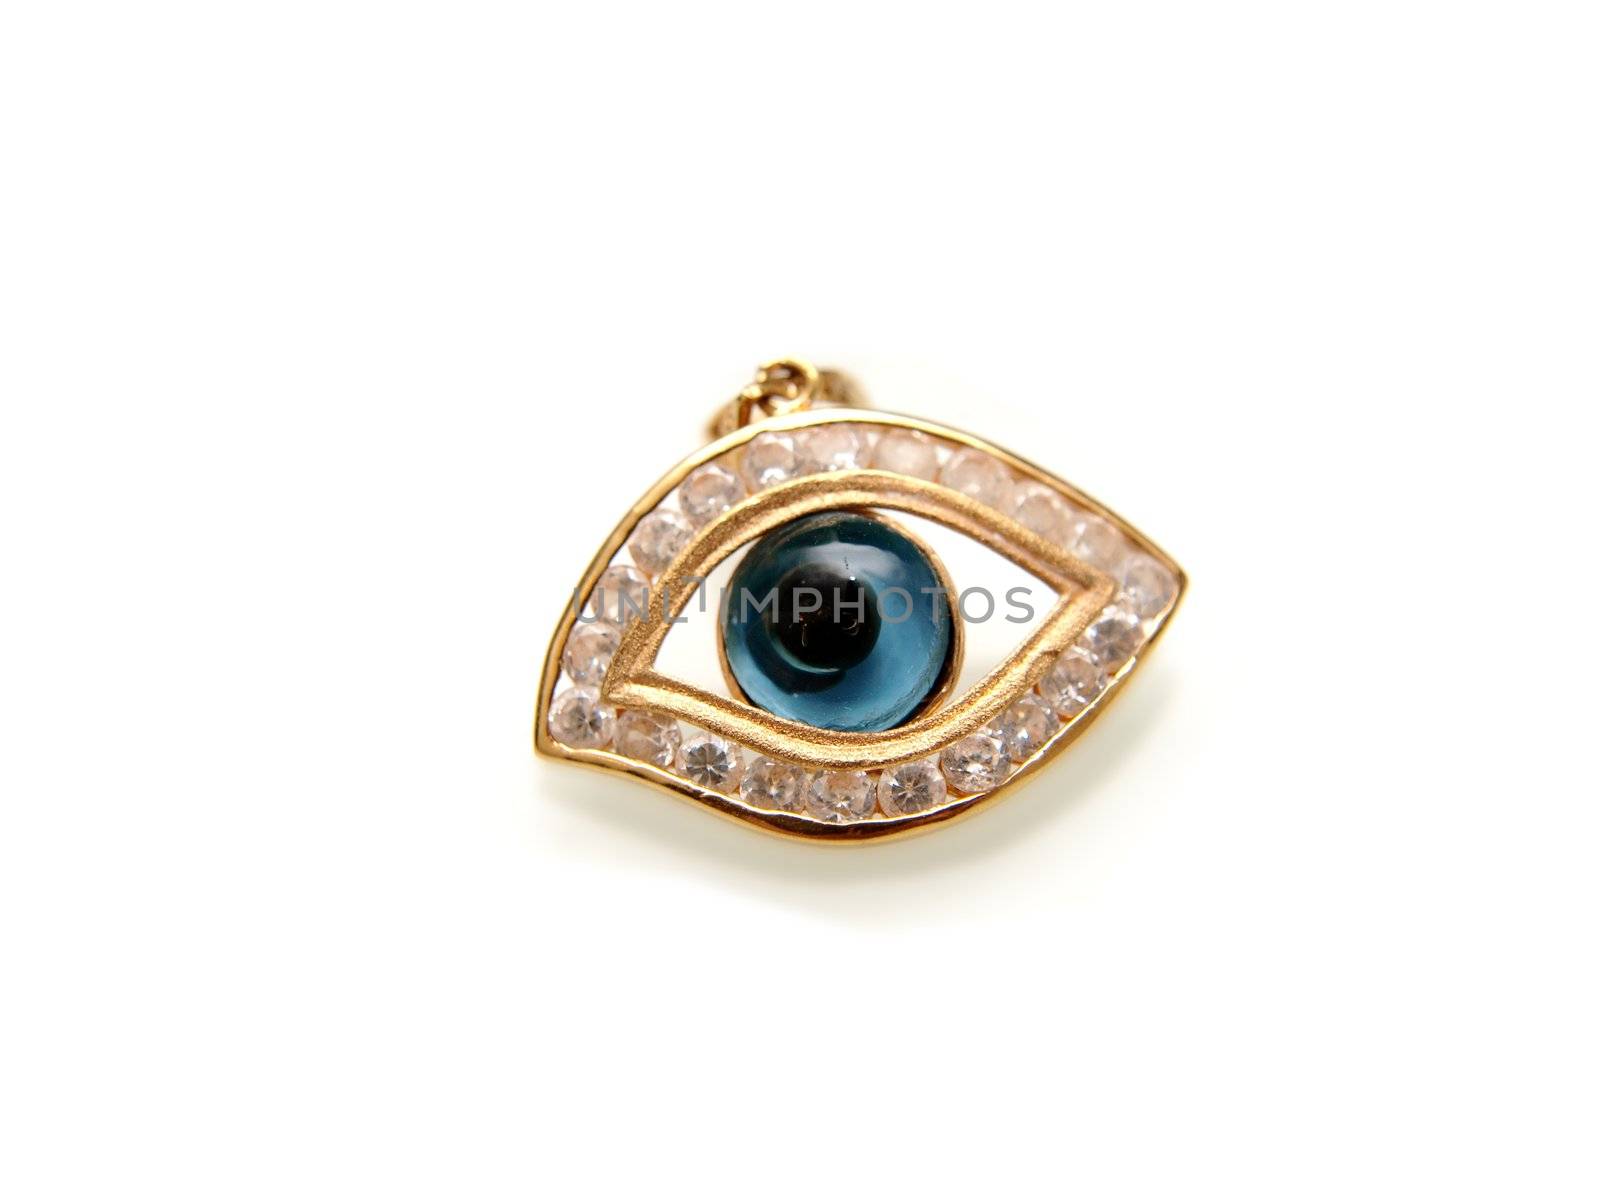 Evil eye with diamonds, and yellow gold, isolated towards white background